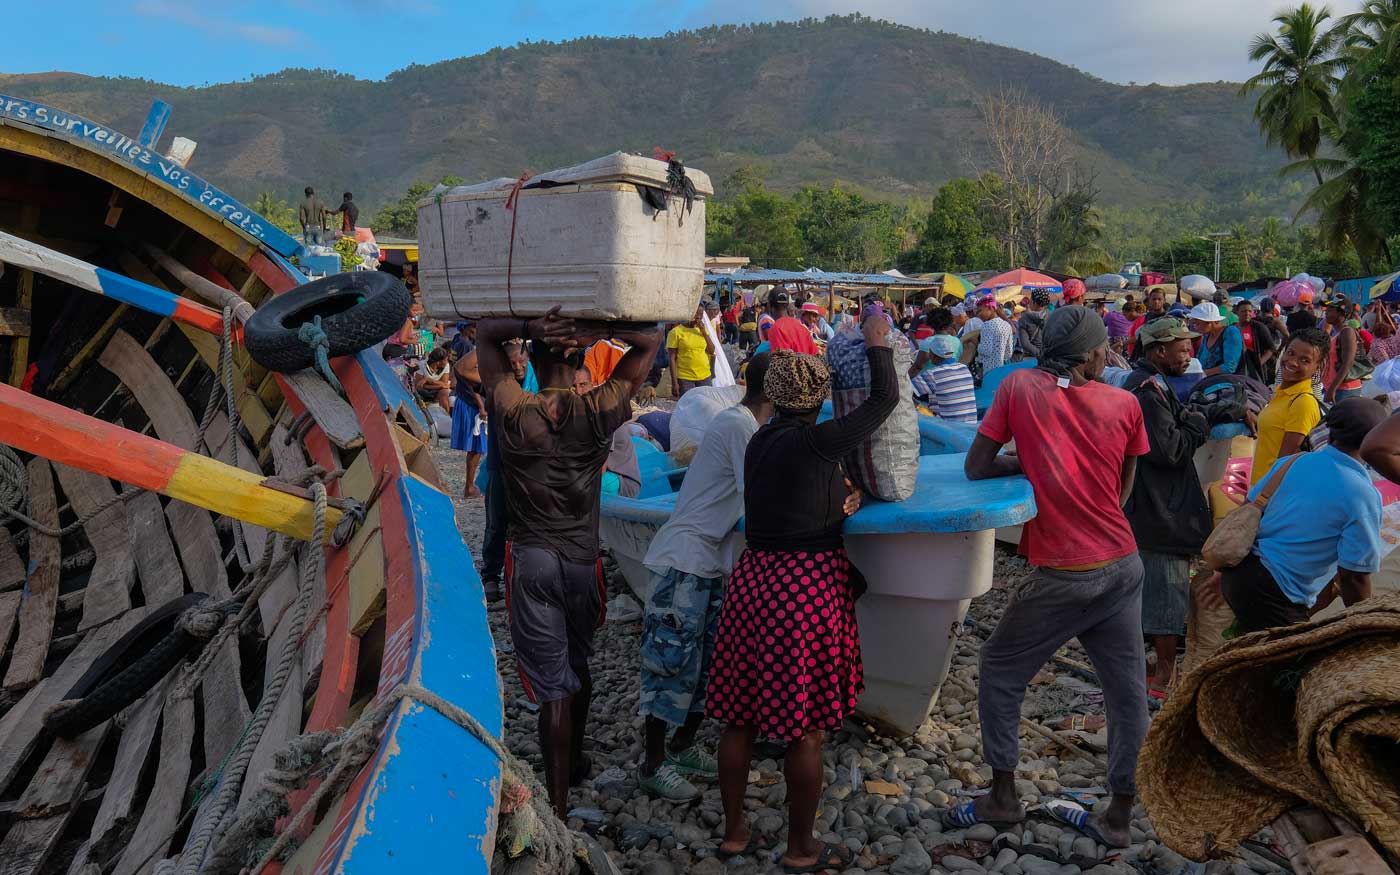 people at a haitian market place with boats